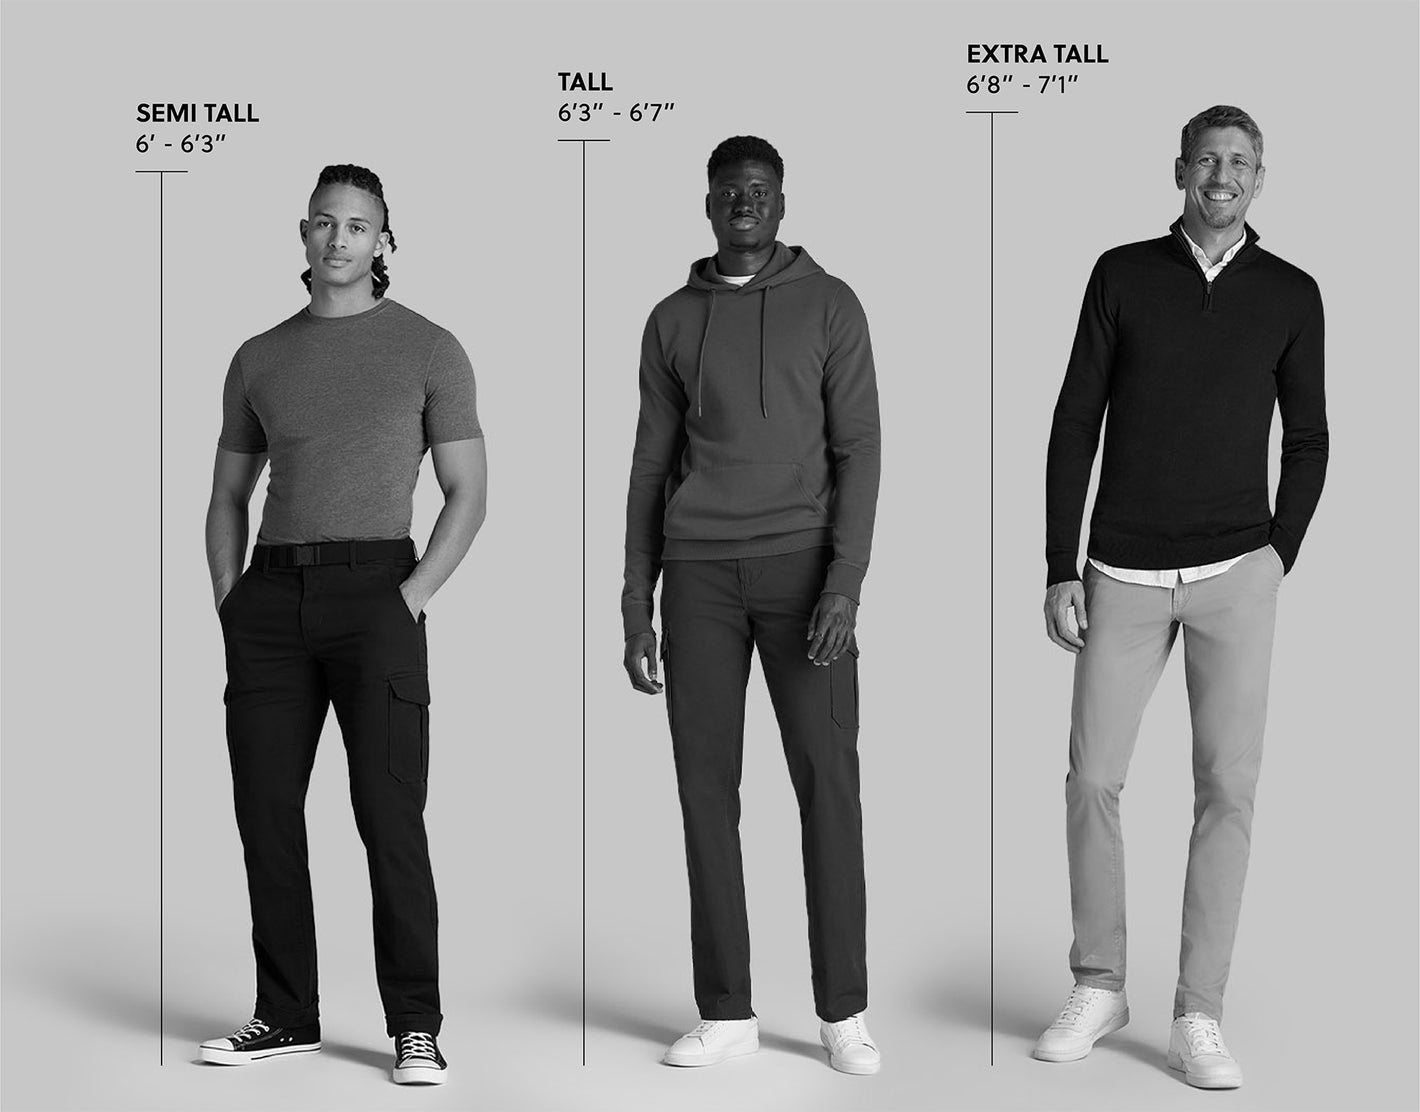 Three tall men standing side by side with one labelled as measuring between 6' and 6'3 in height, another labelled as measuring between 6'3 and 6'7 in height, and the last man labelled as measuring between 6'8 and 7'1 in height.